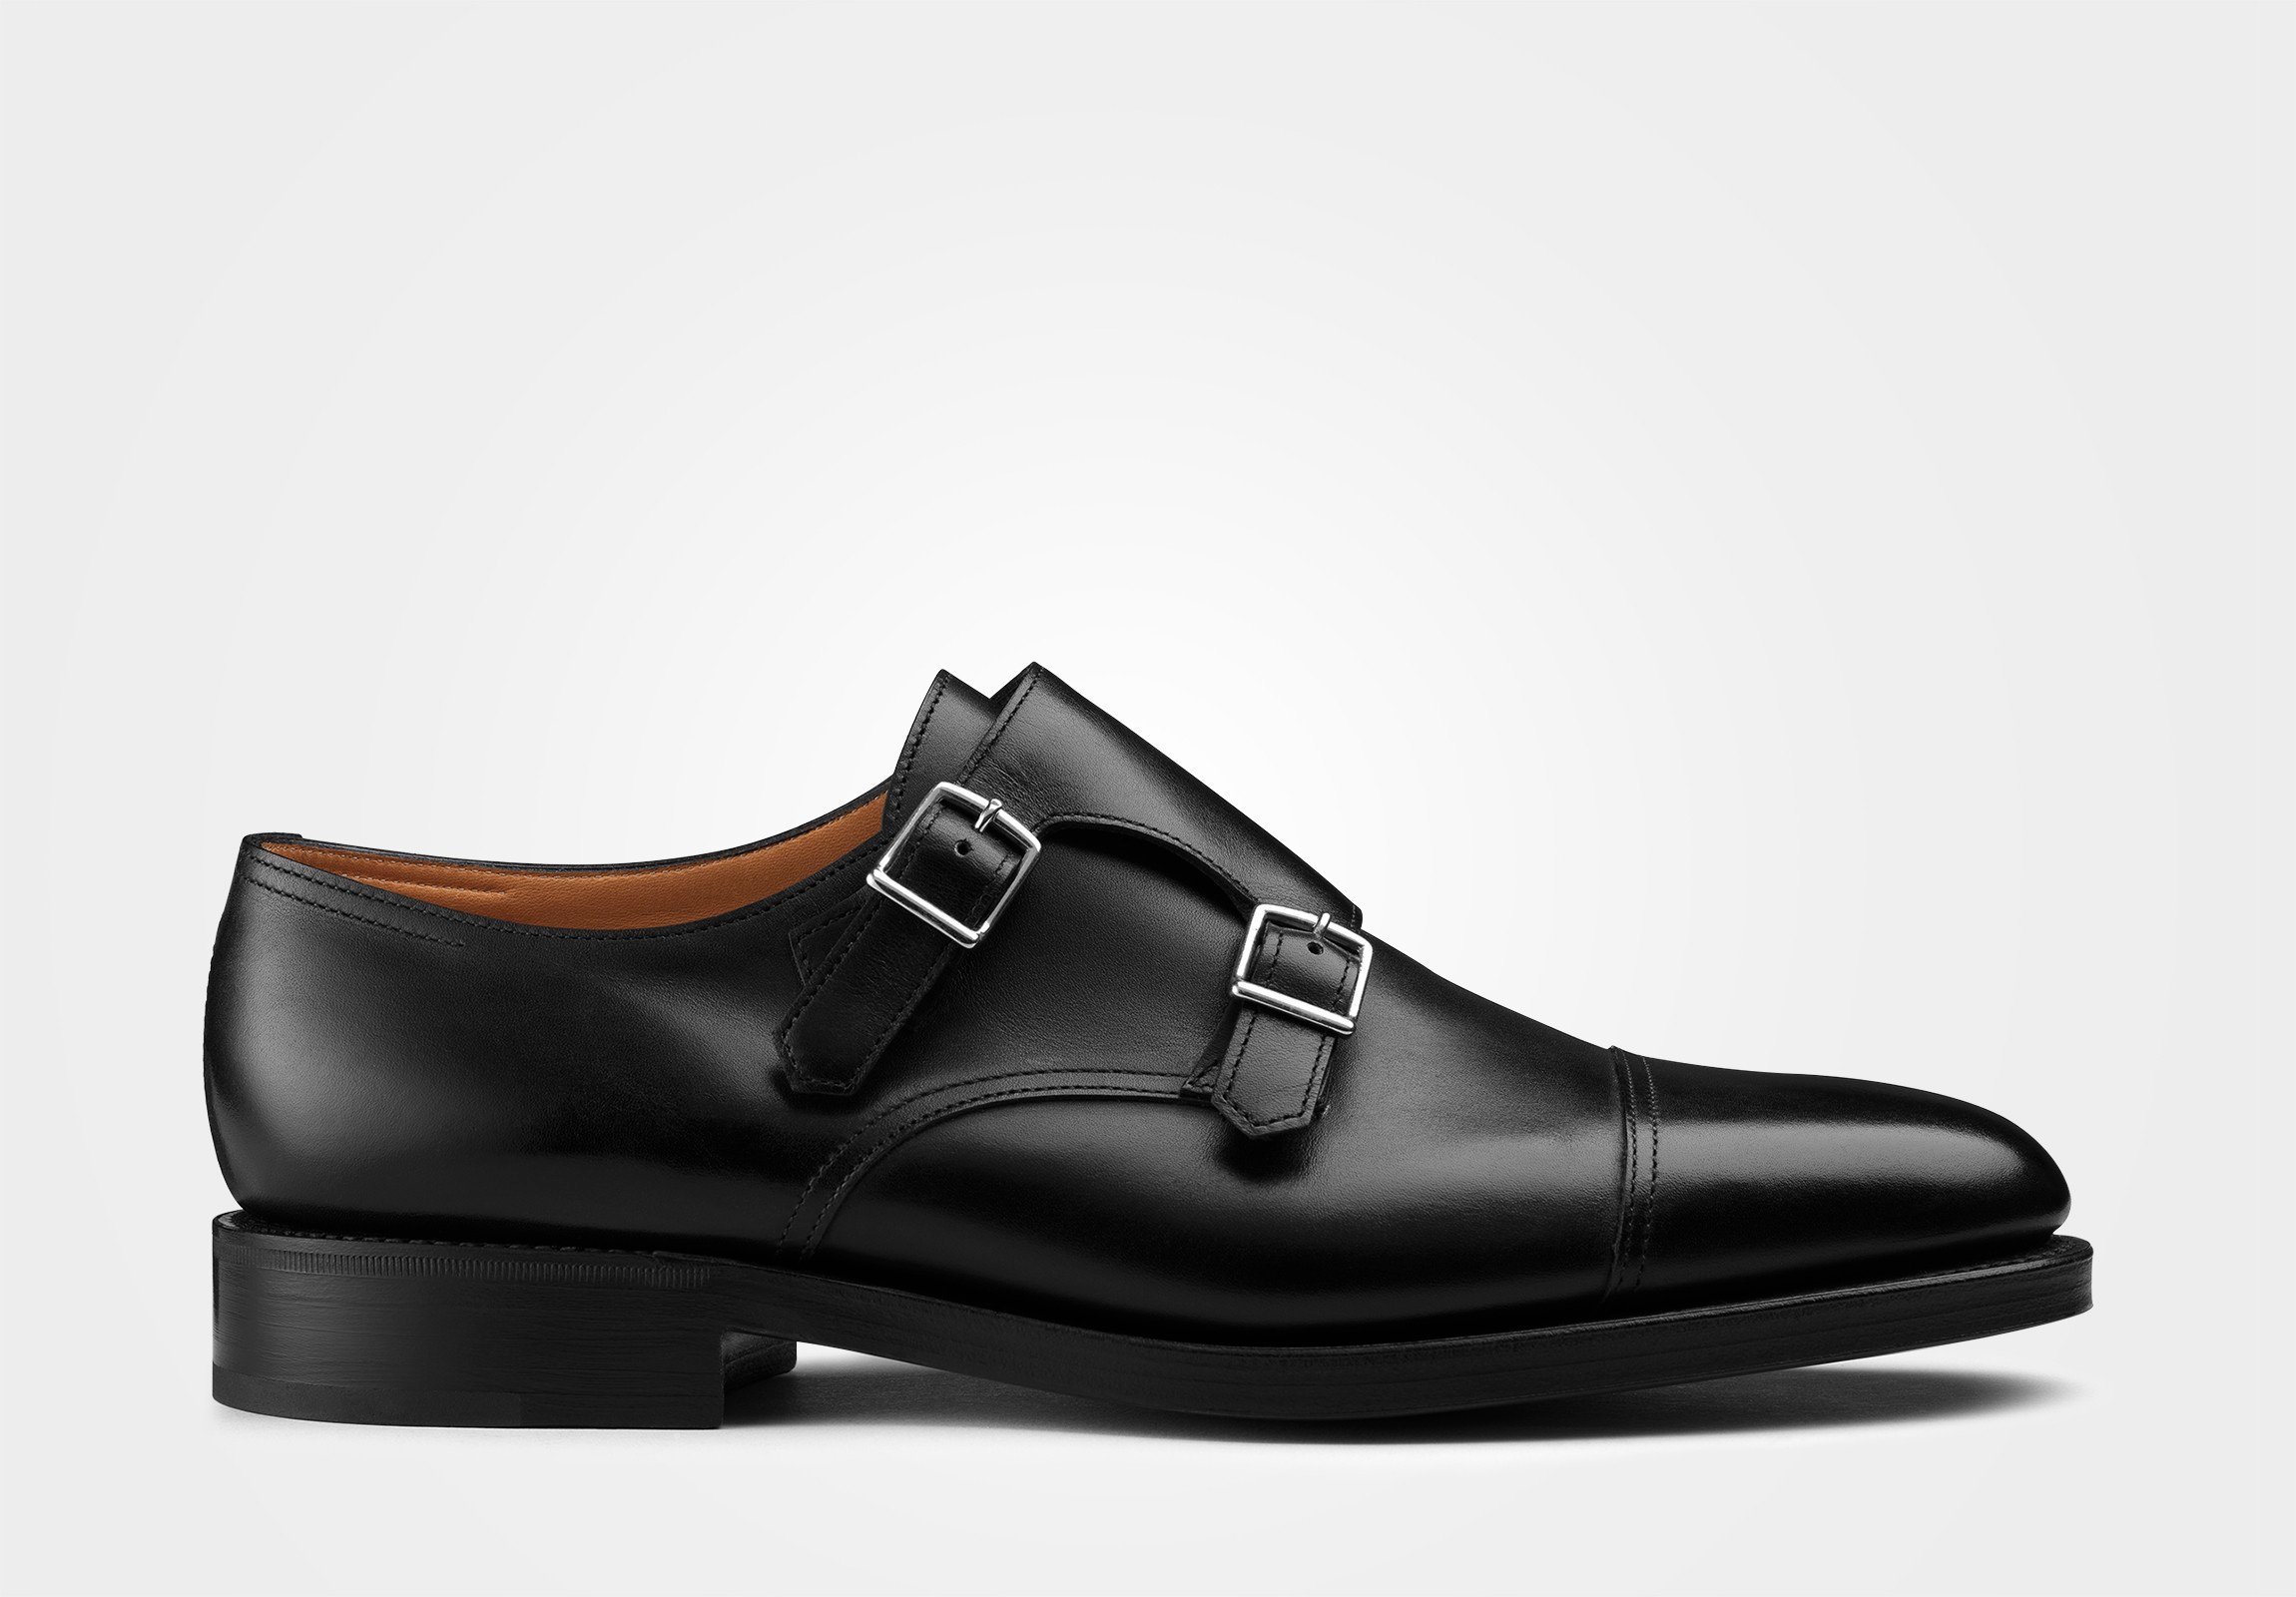 John Lobb | William | The whole collection